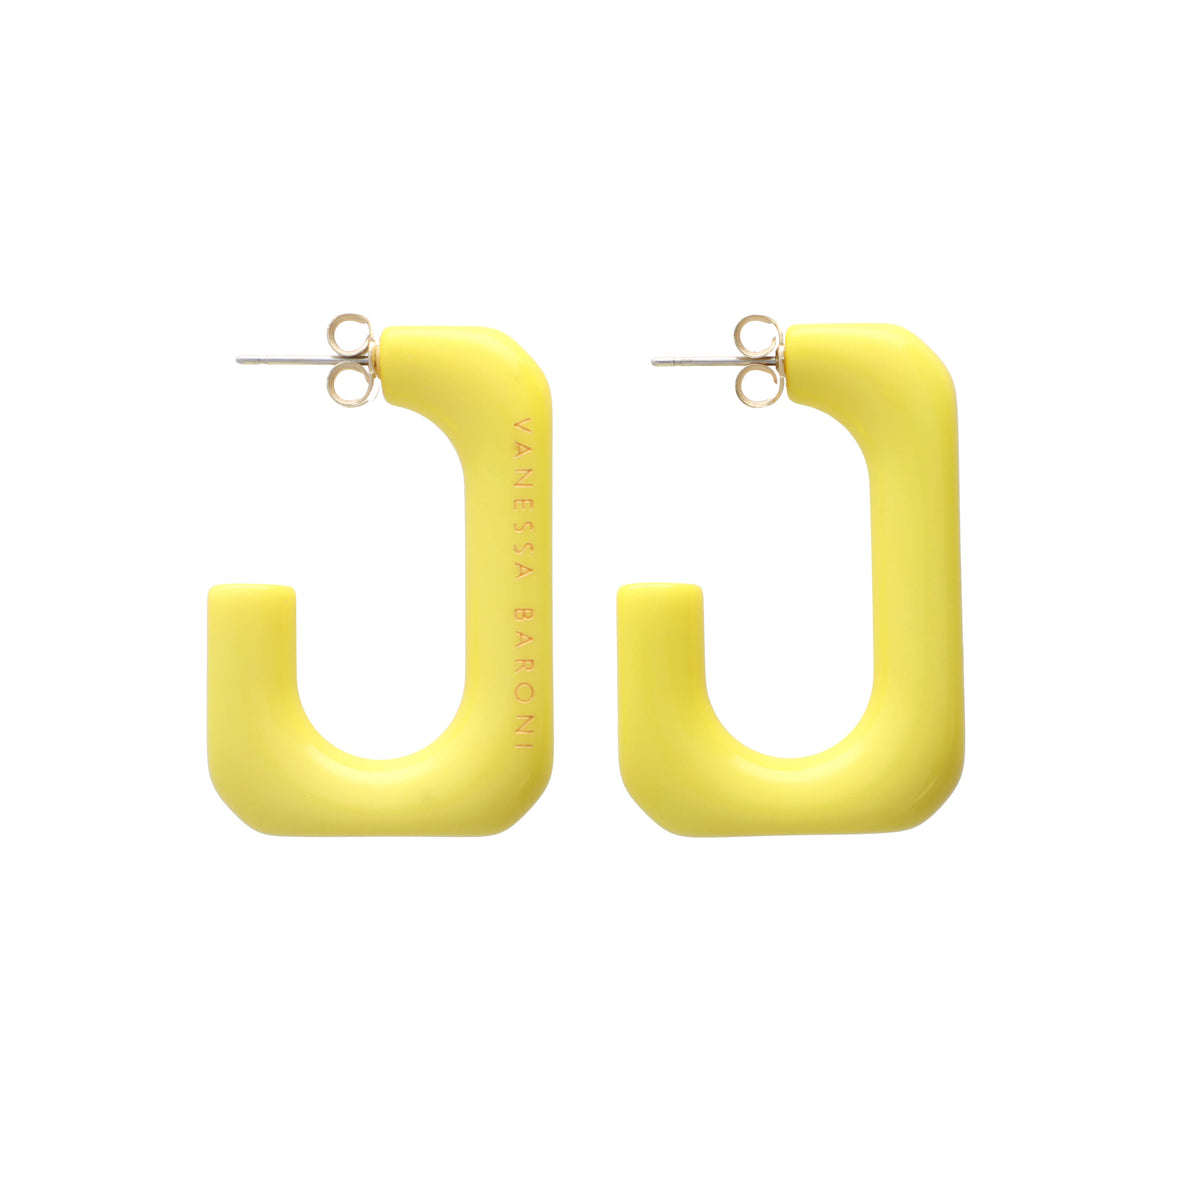 SQUARED Single Earring Small yellow